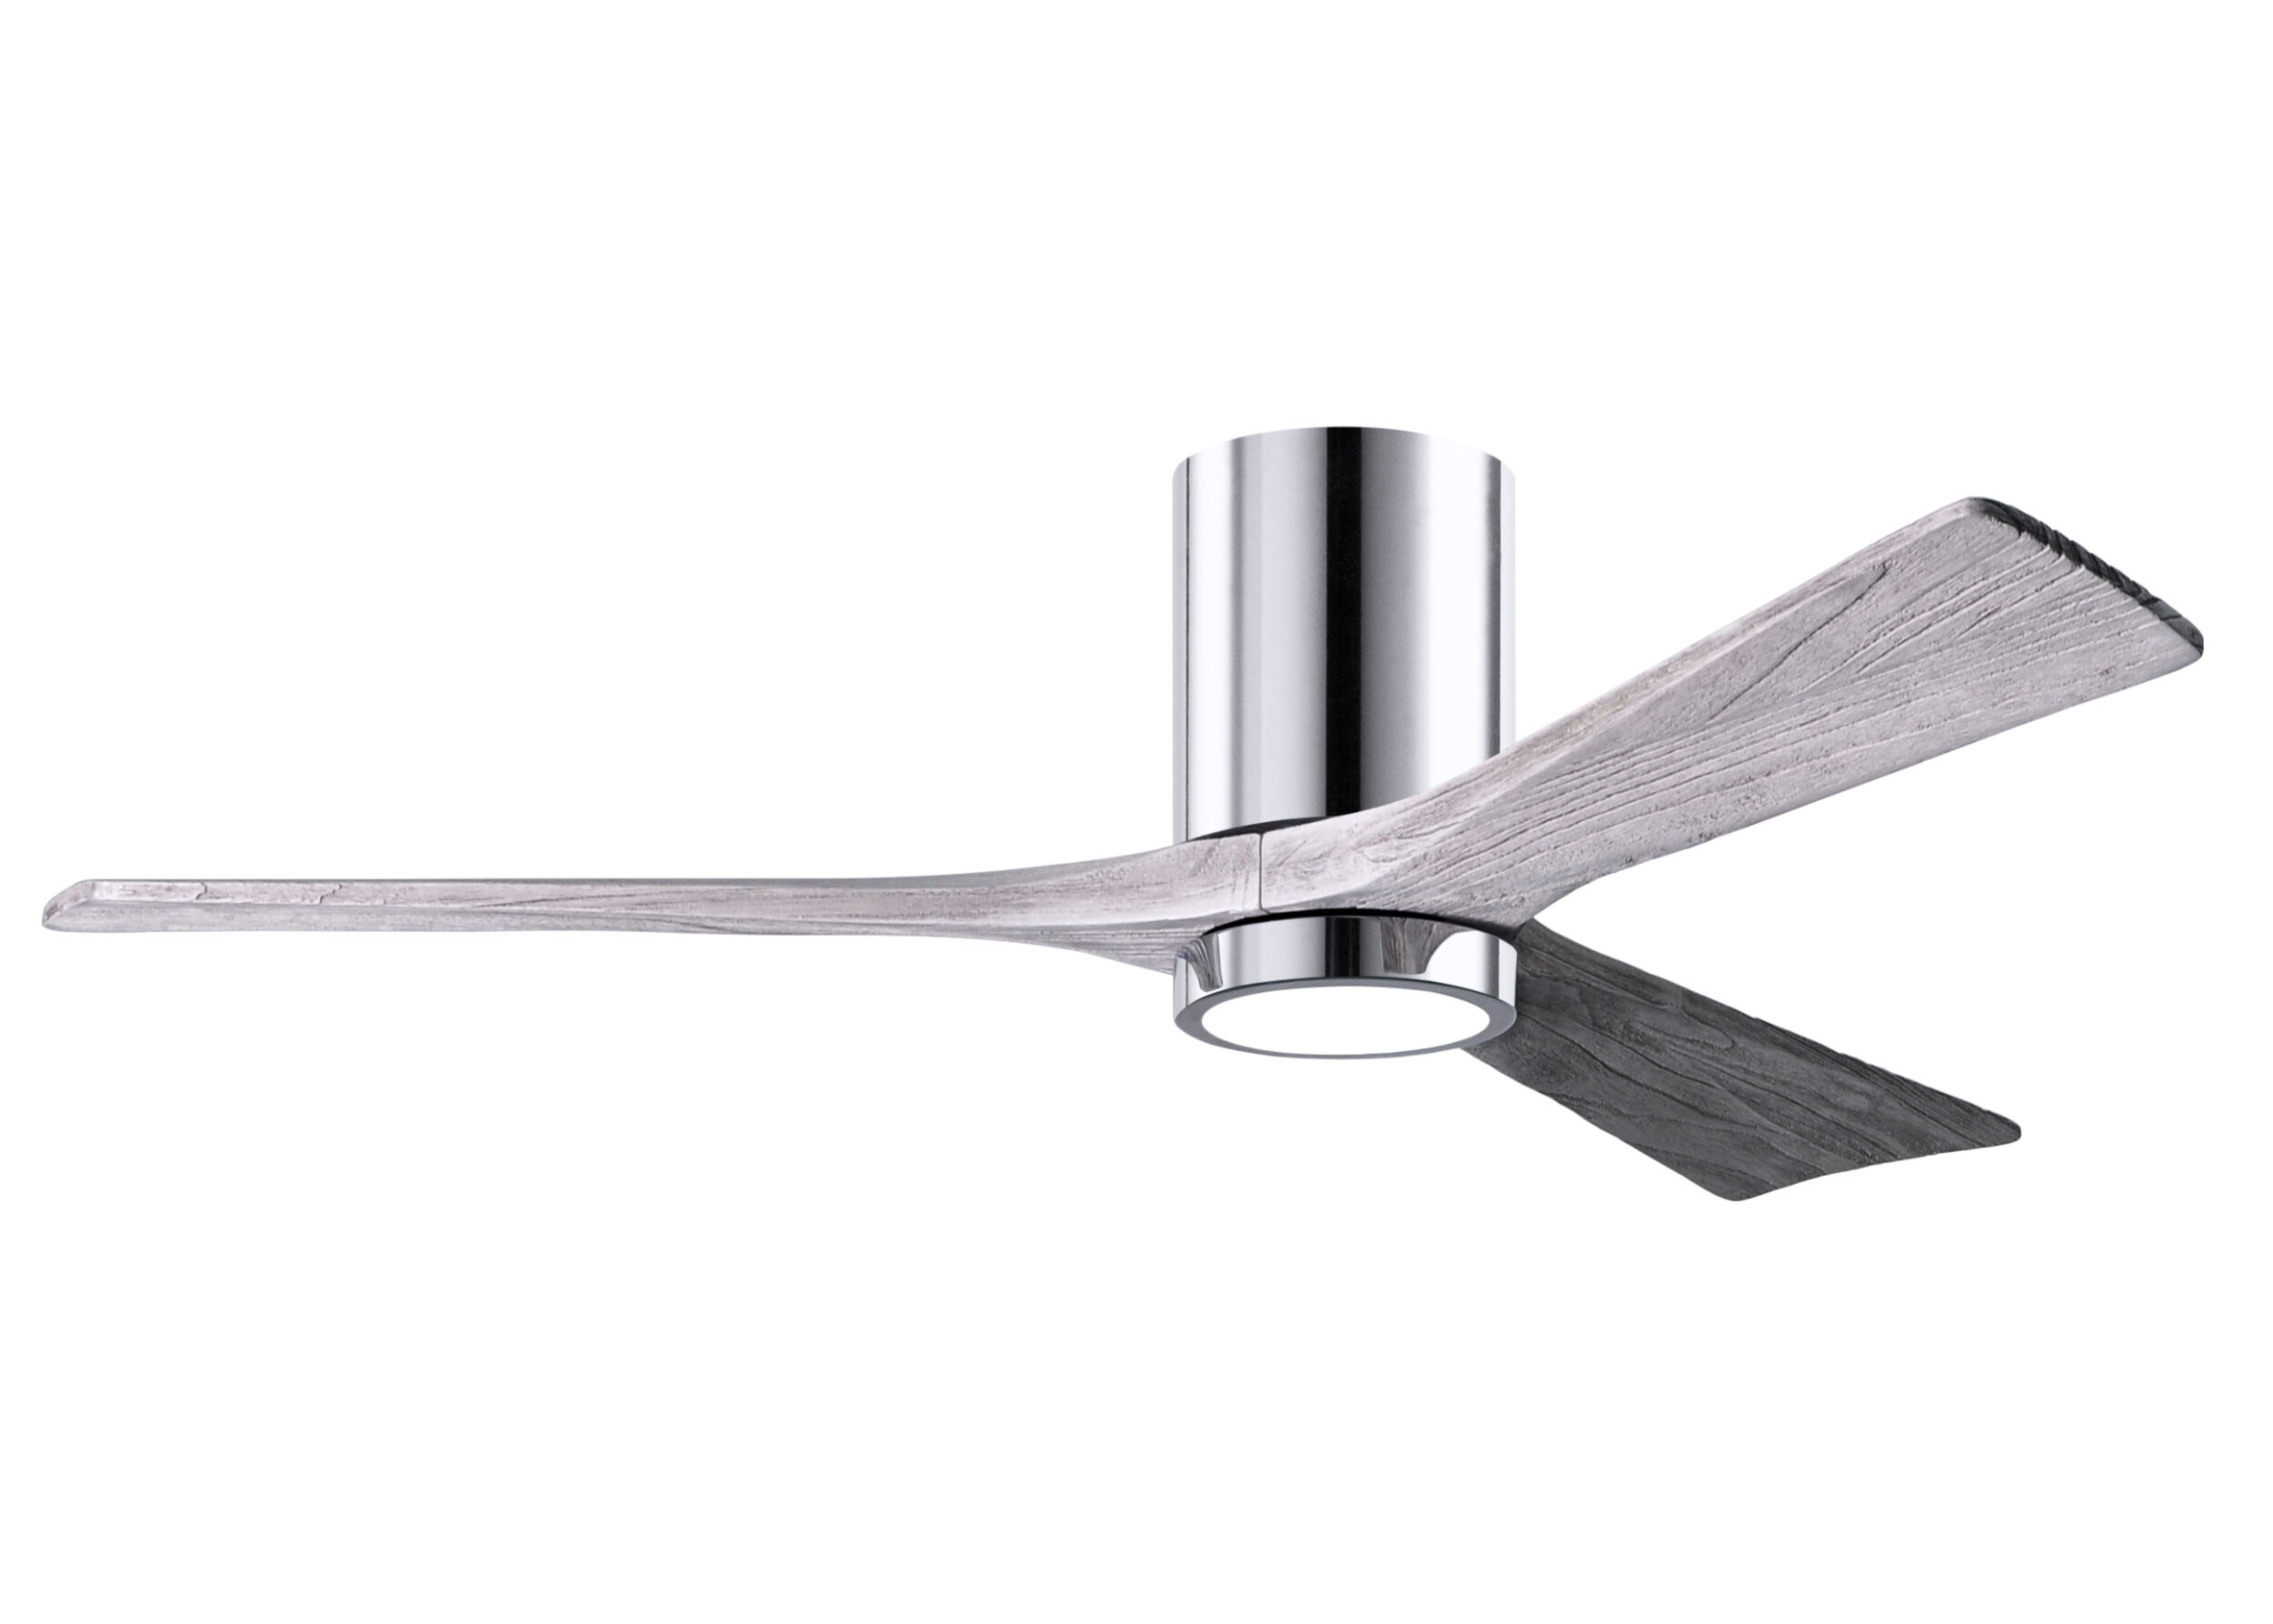 Irene-3HLK Ceiling Fan in Polished Chrome Finish with 52